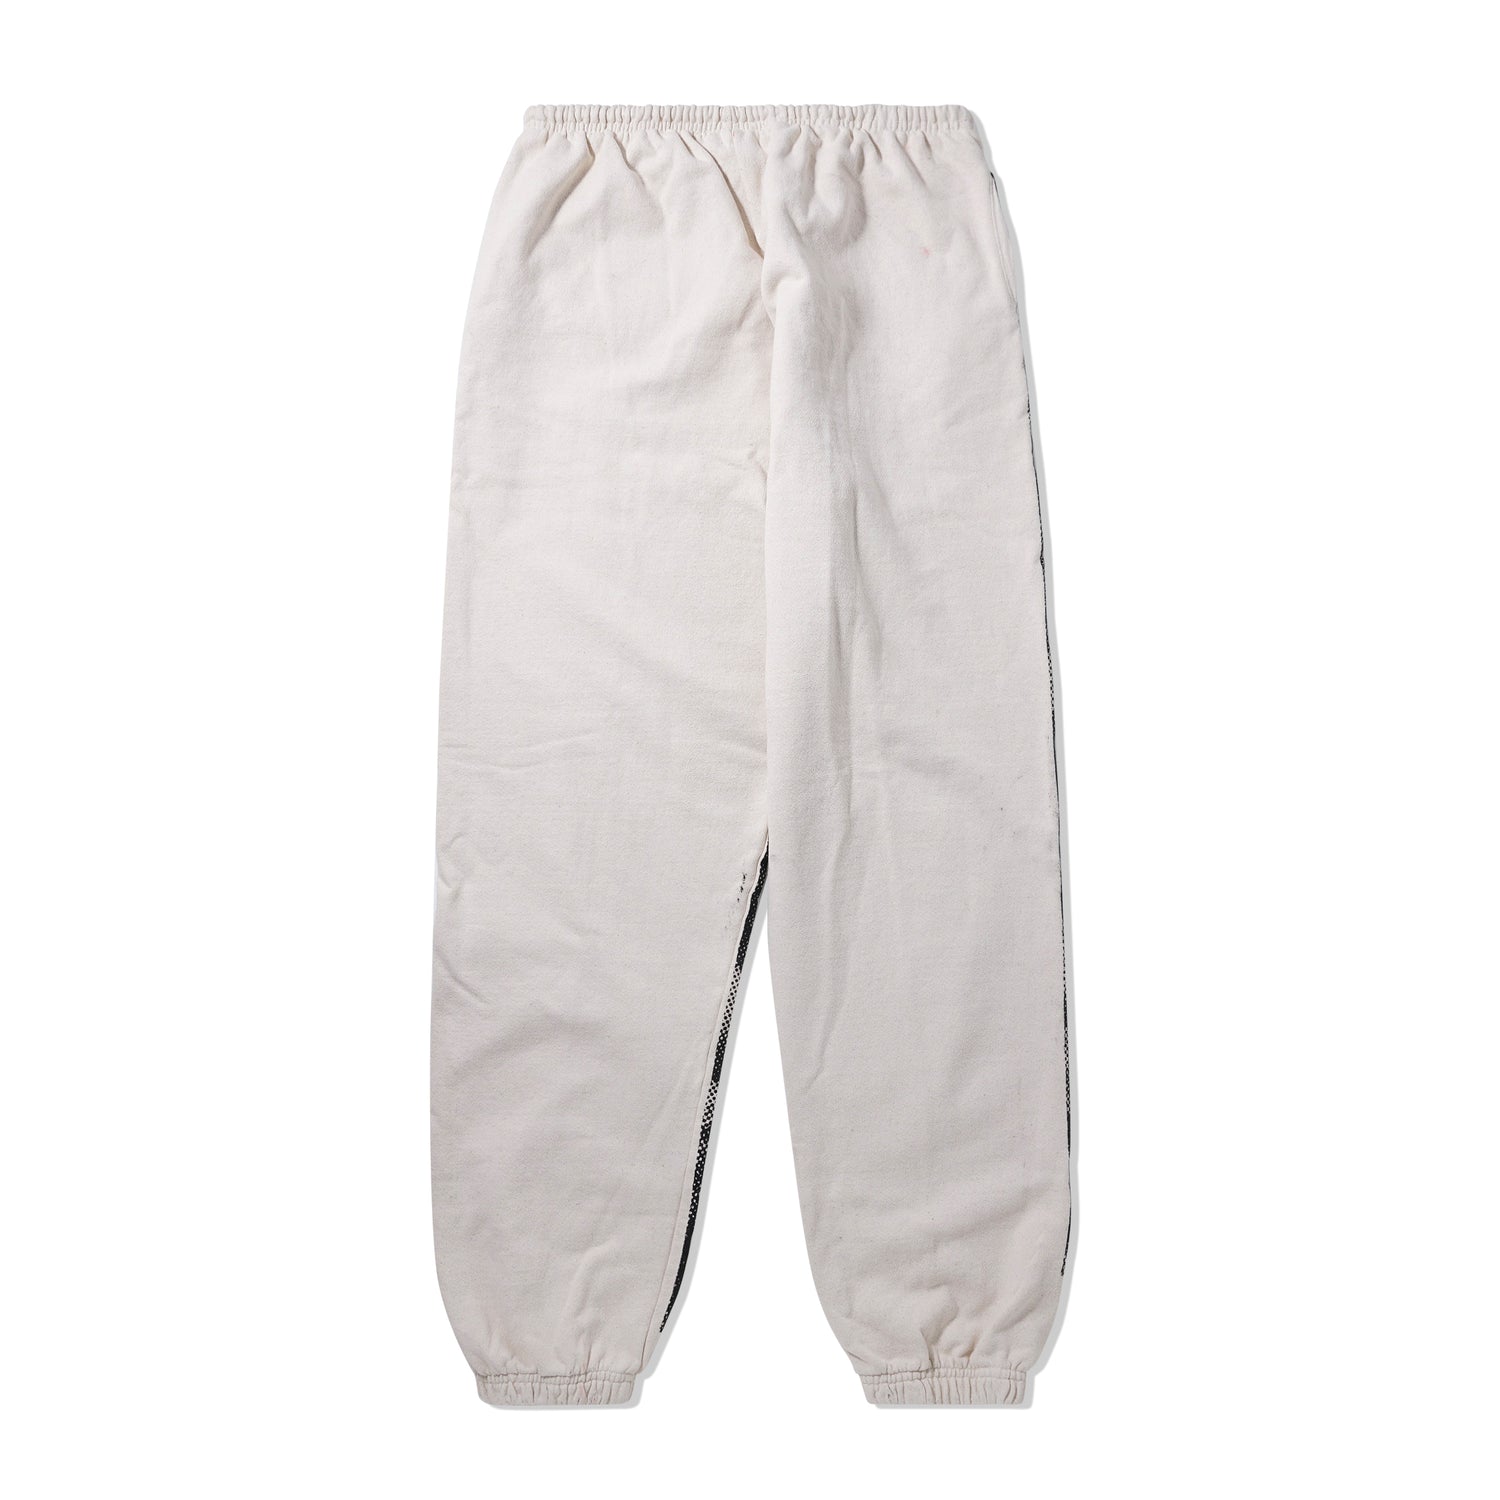 Can Cairn Sweatpants, Multi